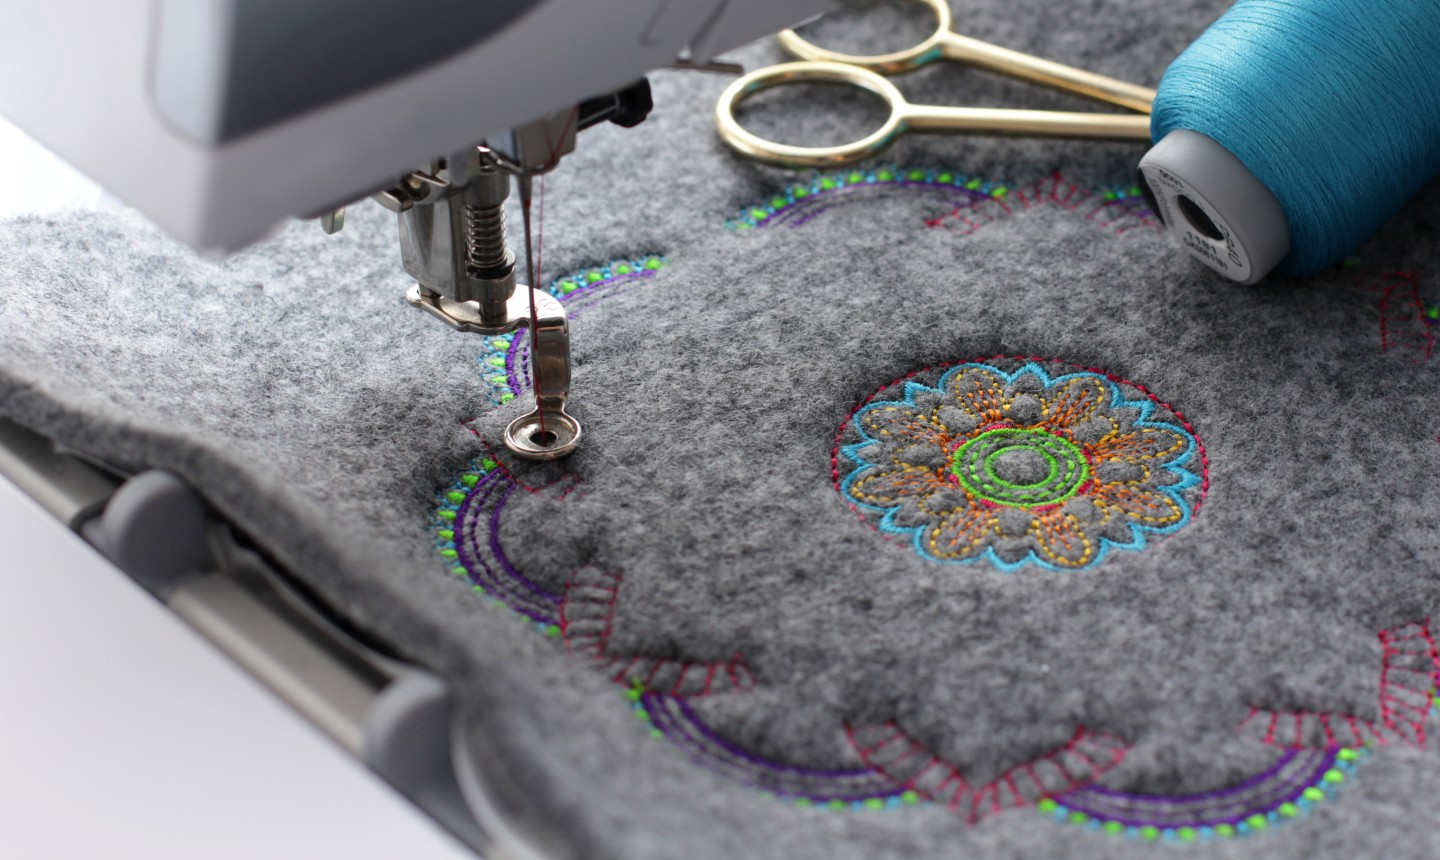 How To Design Embroidery Patterns For Machine Our 7 Top Tips For Machine Embroidery Newbies